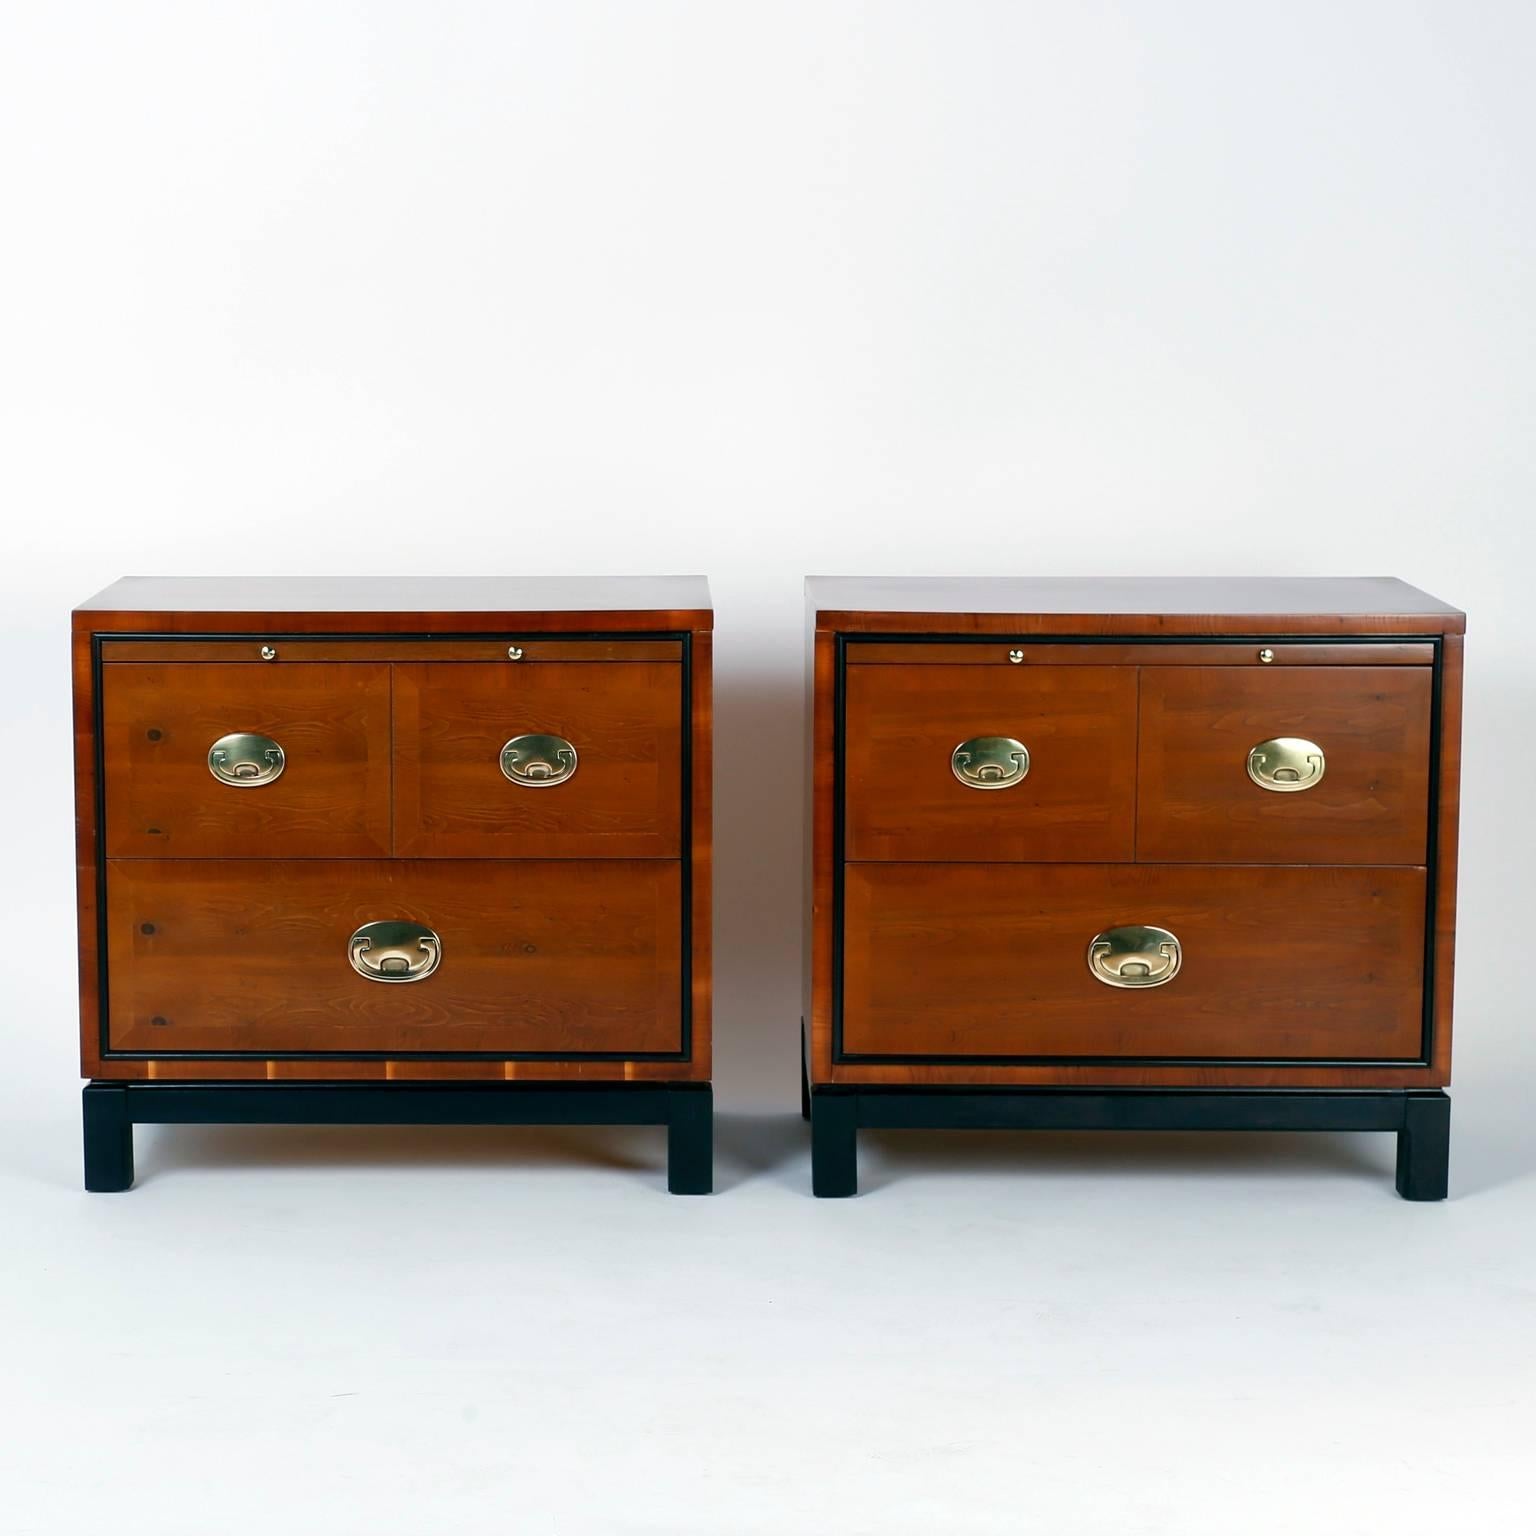 Pair of nightstands or three-drawer chests beautifully crafted with well grained walnut in a clean modern form. Featuring a pull-out tray, stylized campaign hardware and an ebonized Ming style base. Signed Hickory Manufacturing Co. in a drawer.